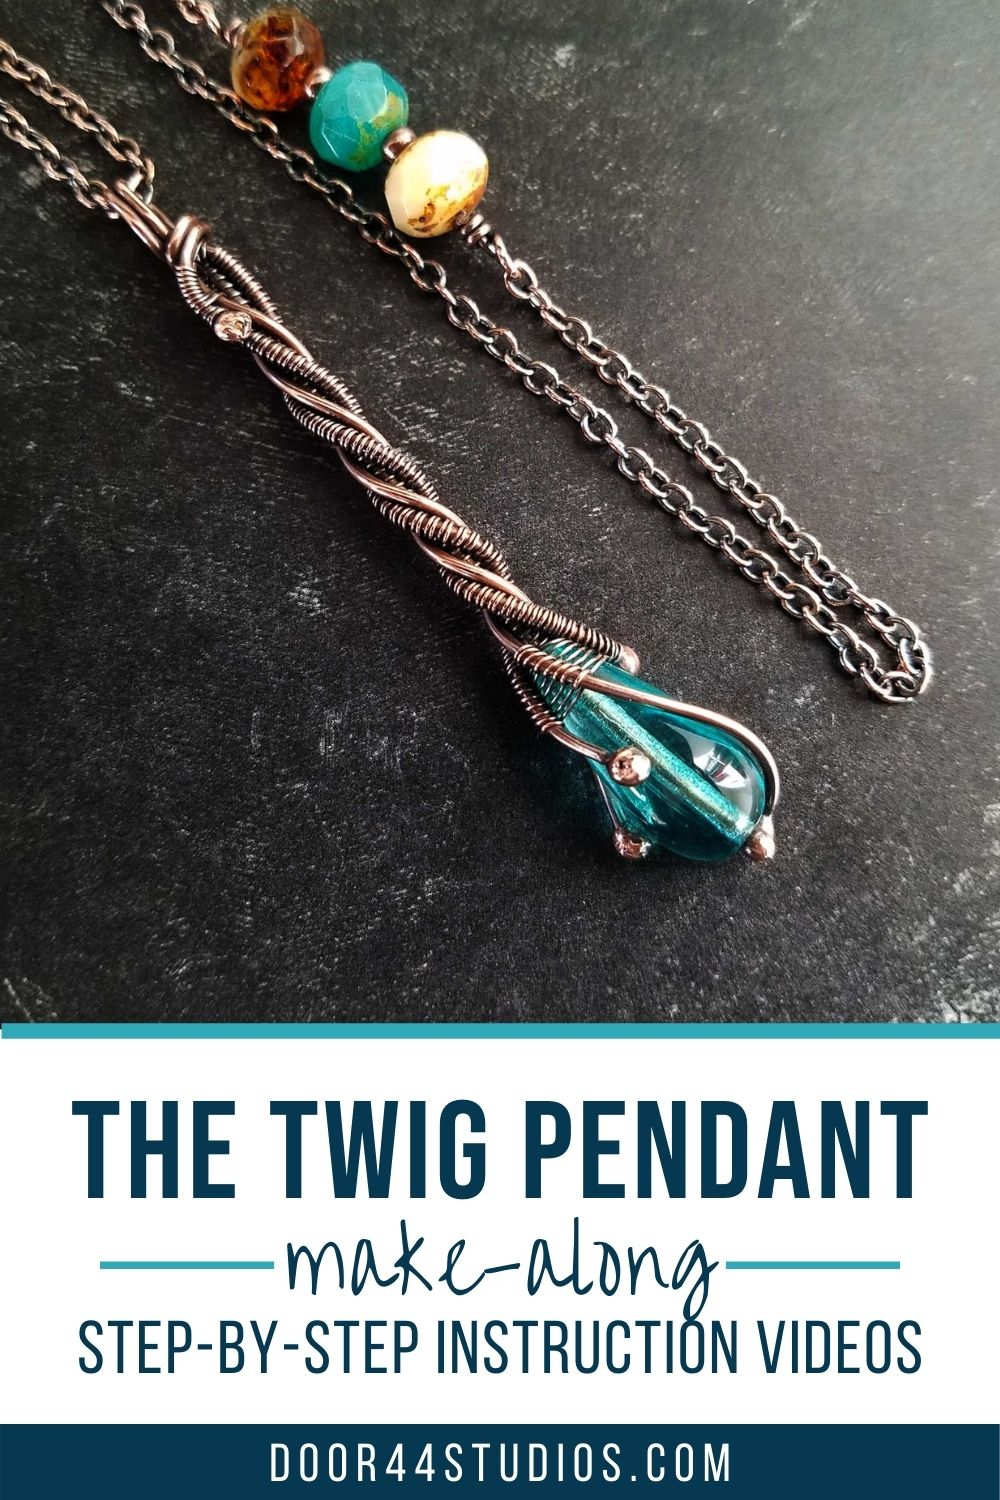 The Twig Pendant Video-Guided Make-Along Series - Pinnable Image